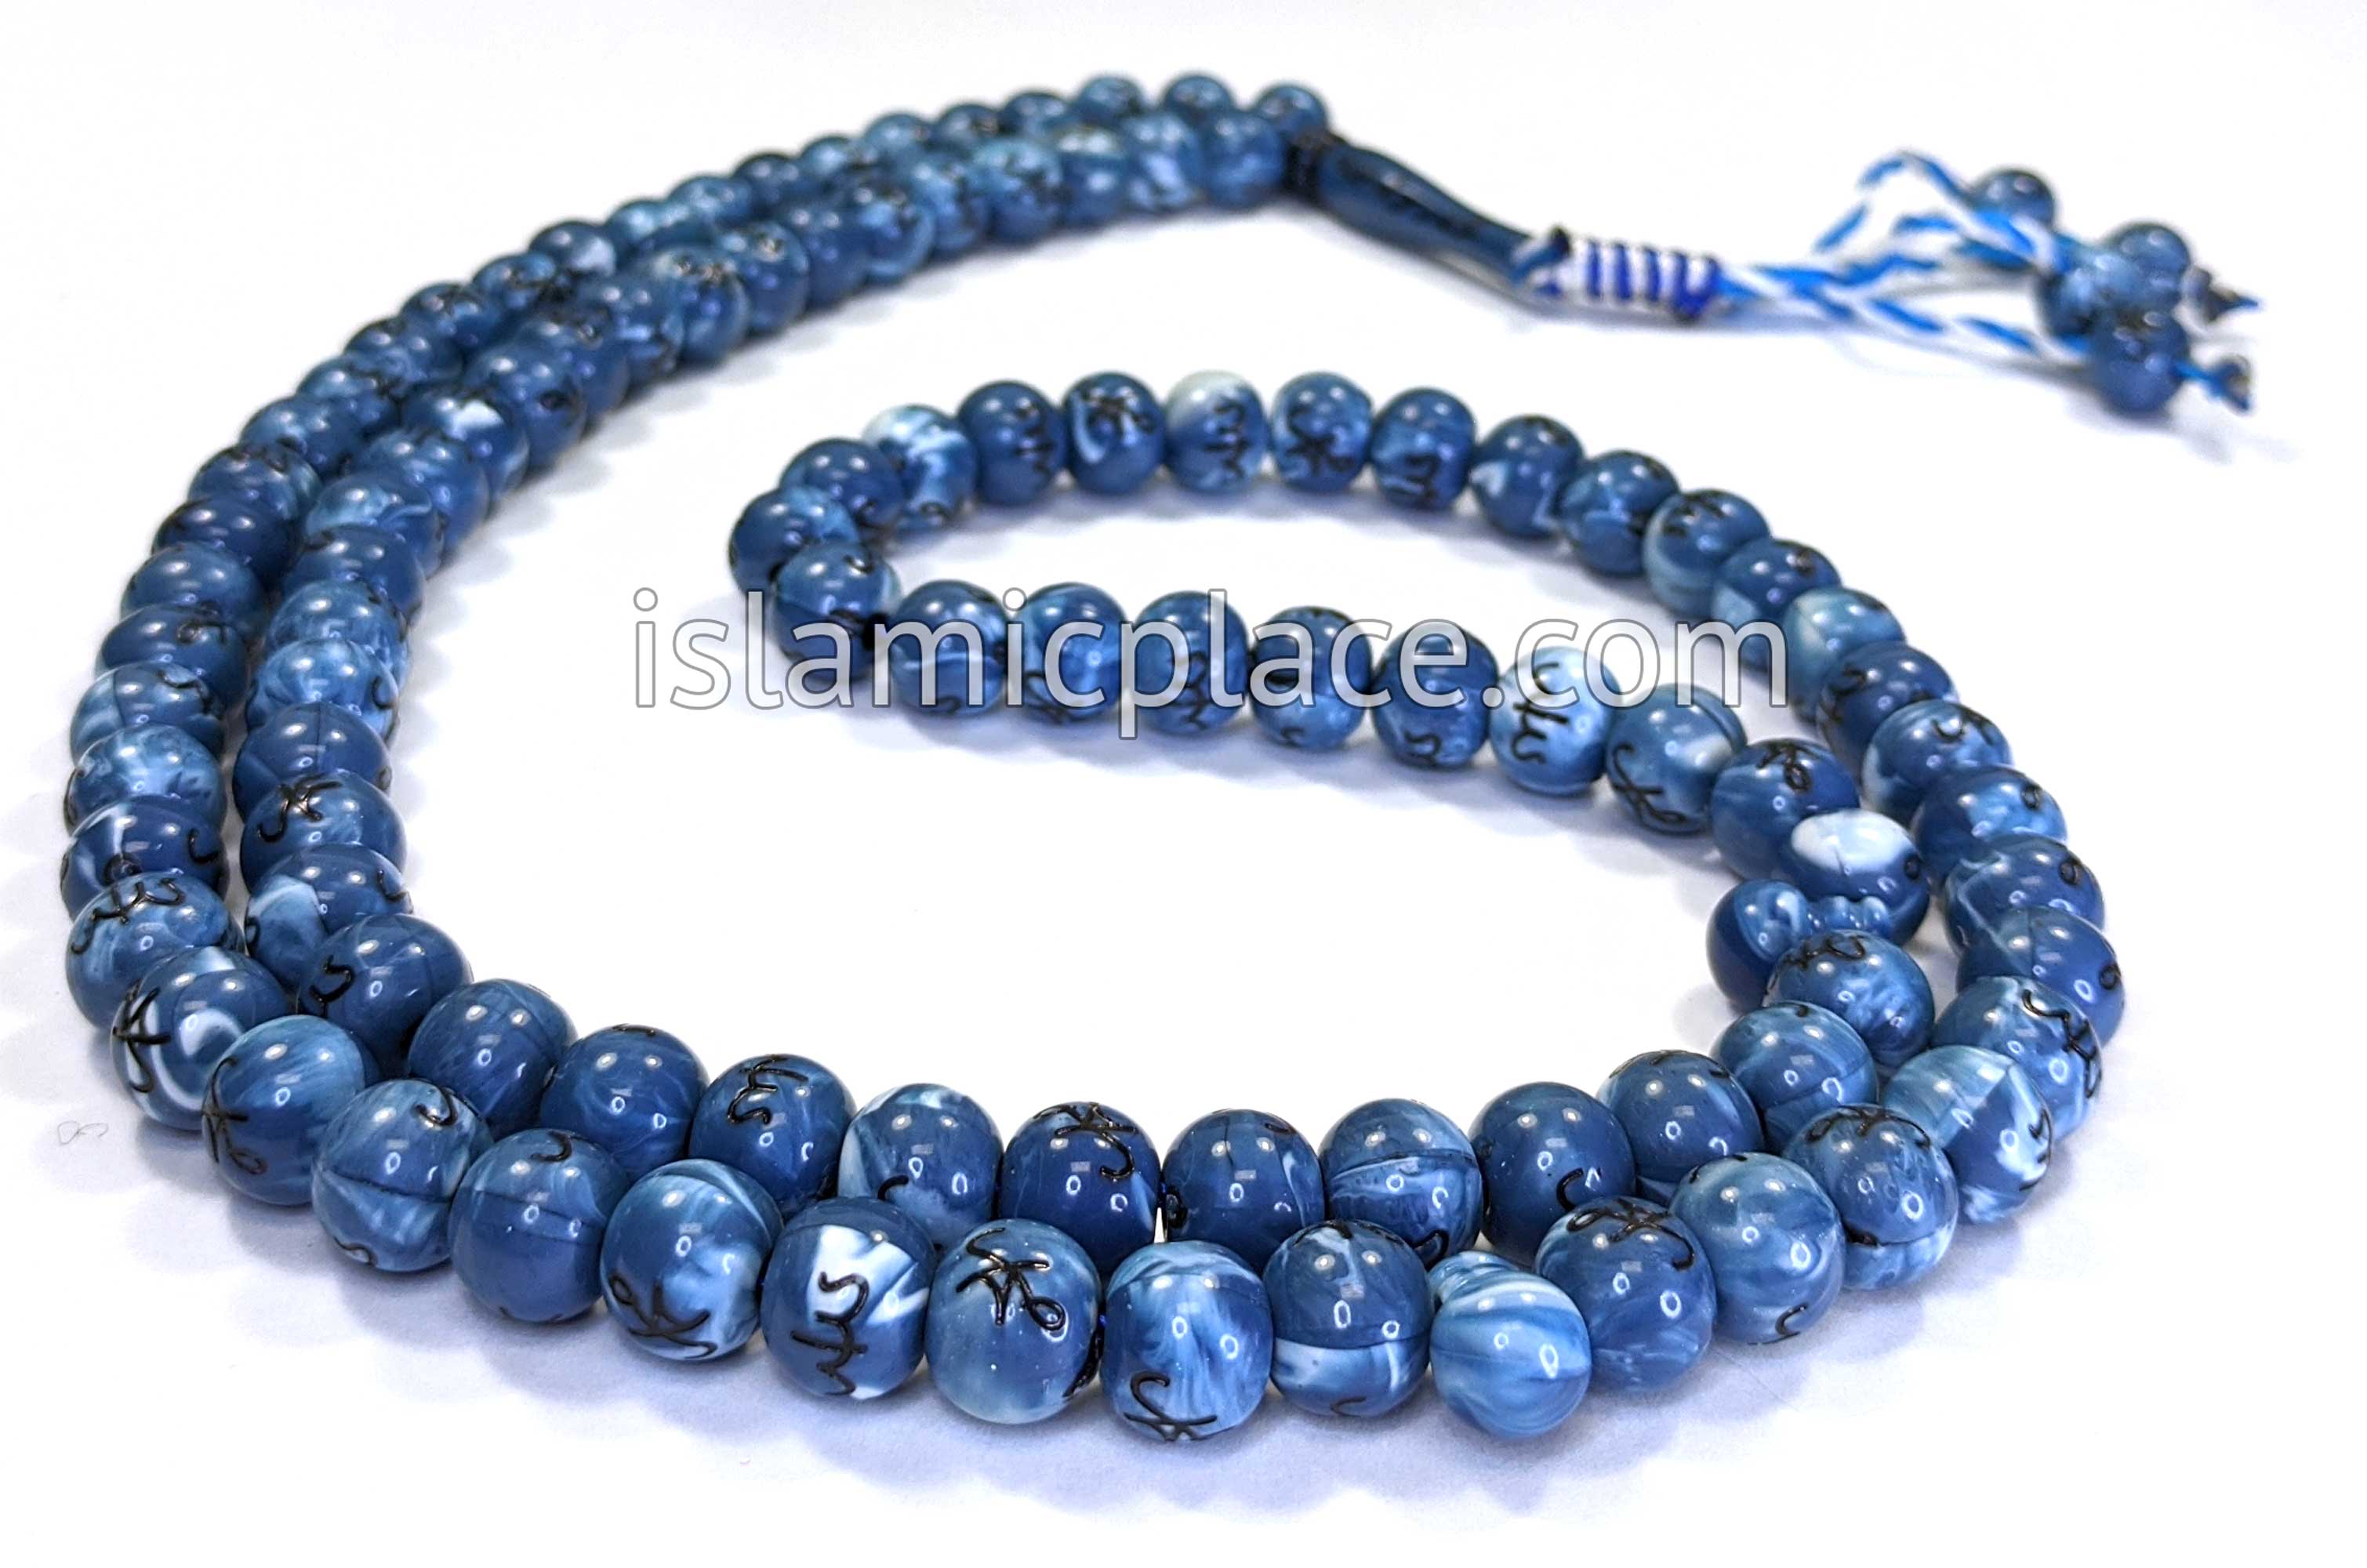 Marble Blue - Large Bead Tasbih Prayer Beads with Allah & Muhammad Scr -  The Islamic Place